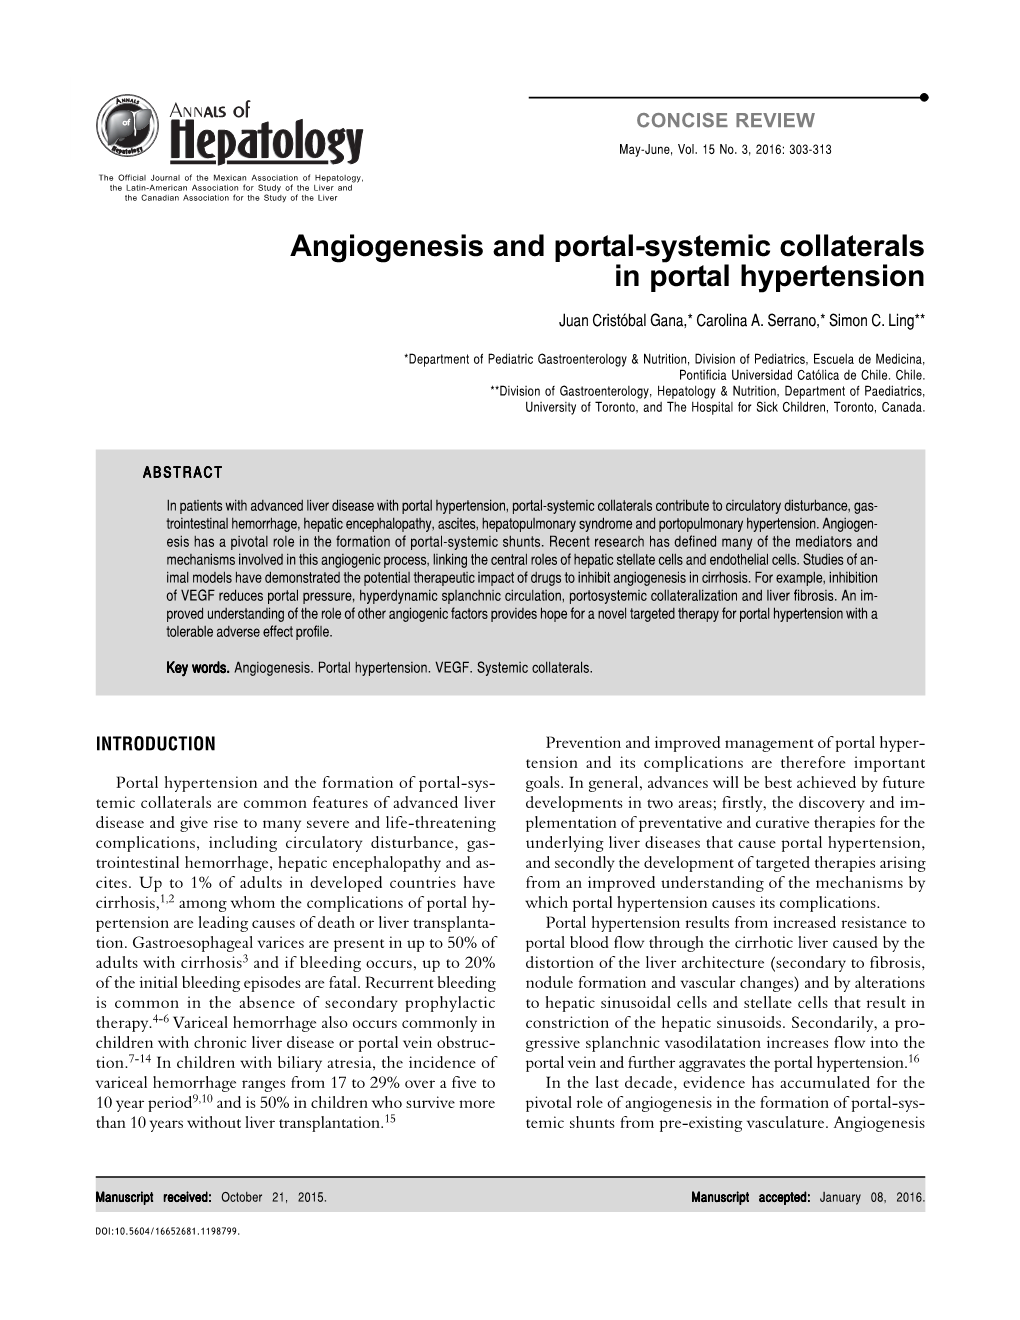 Angiogenesis and Portal-Systemic Collaterals in Portal Hypertension